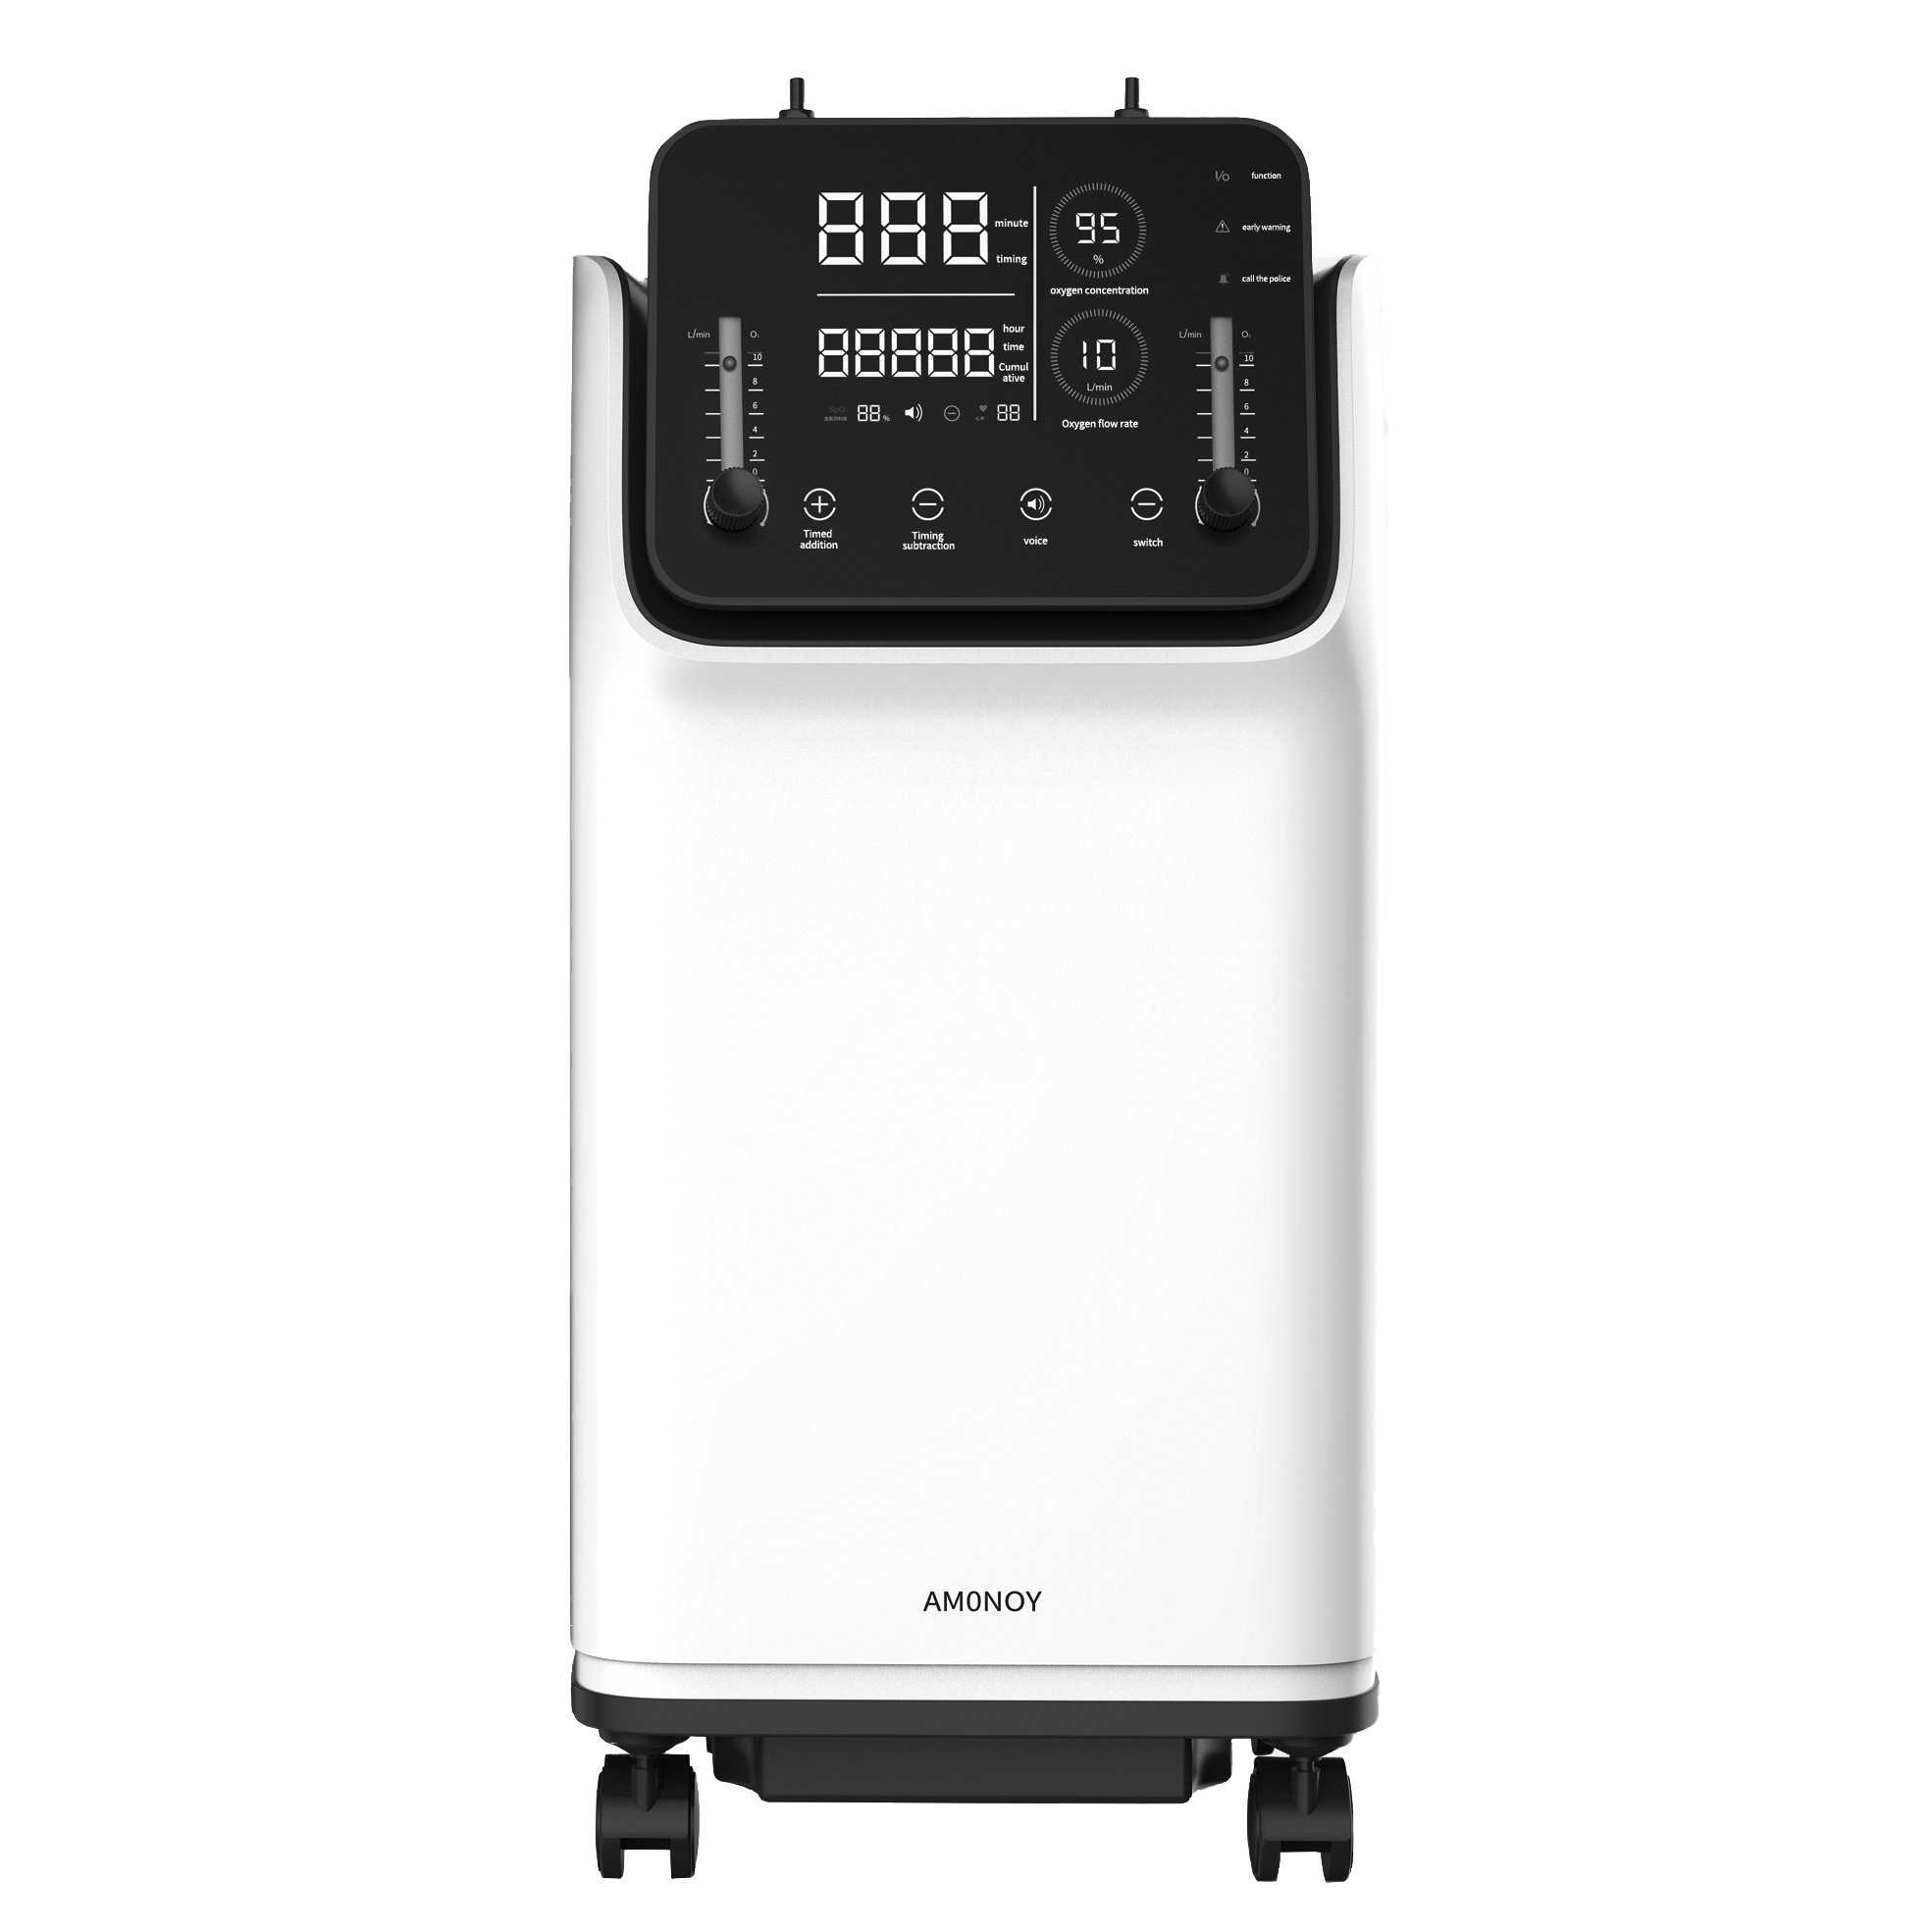 COVID-19 Oxygen Concentrators: How It Works, When to Buy, Prices, Best Models and More Details